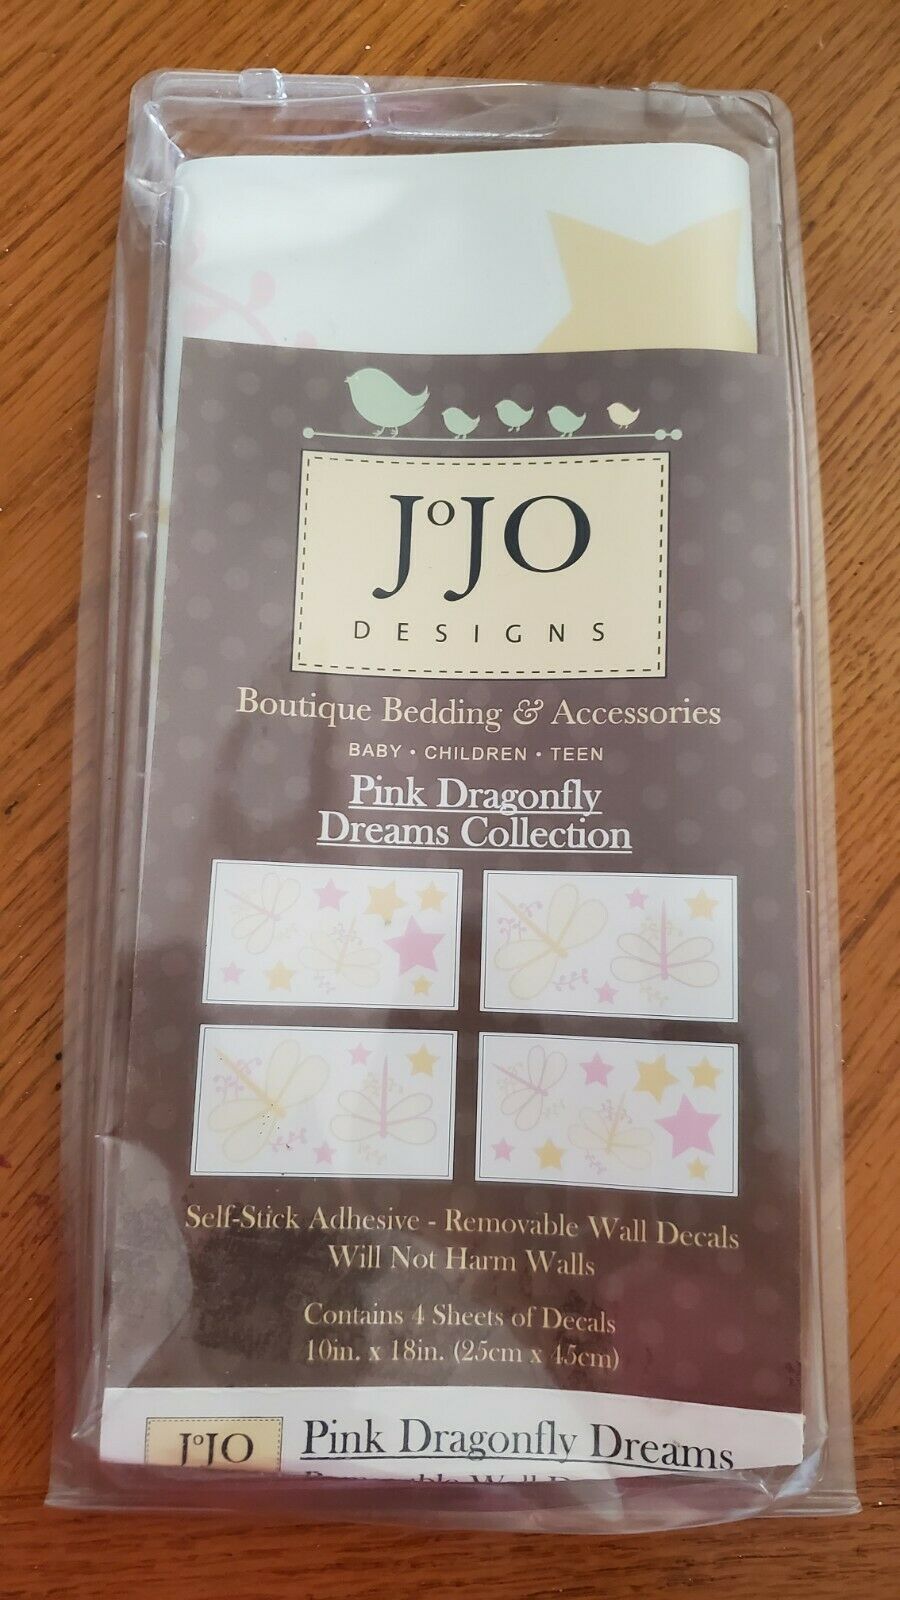 Jojo Designs Pink Dragonfly Dreams Collection Wall Decals